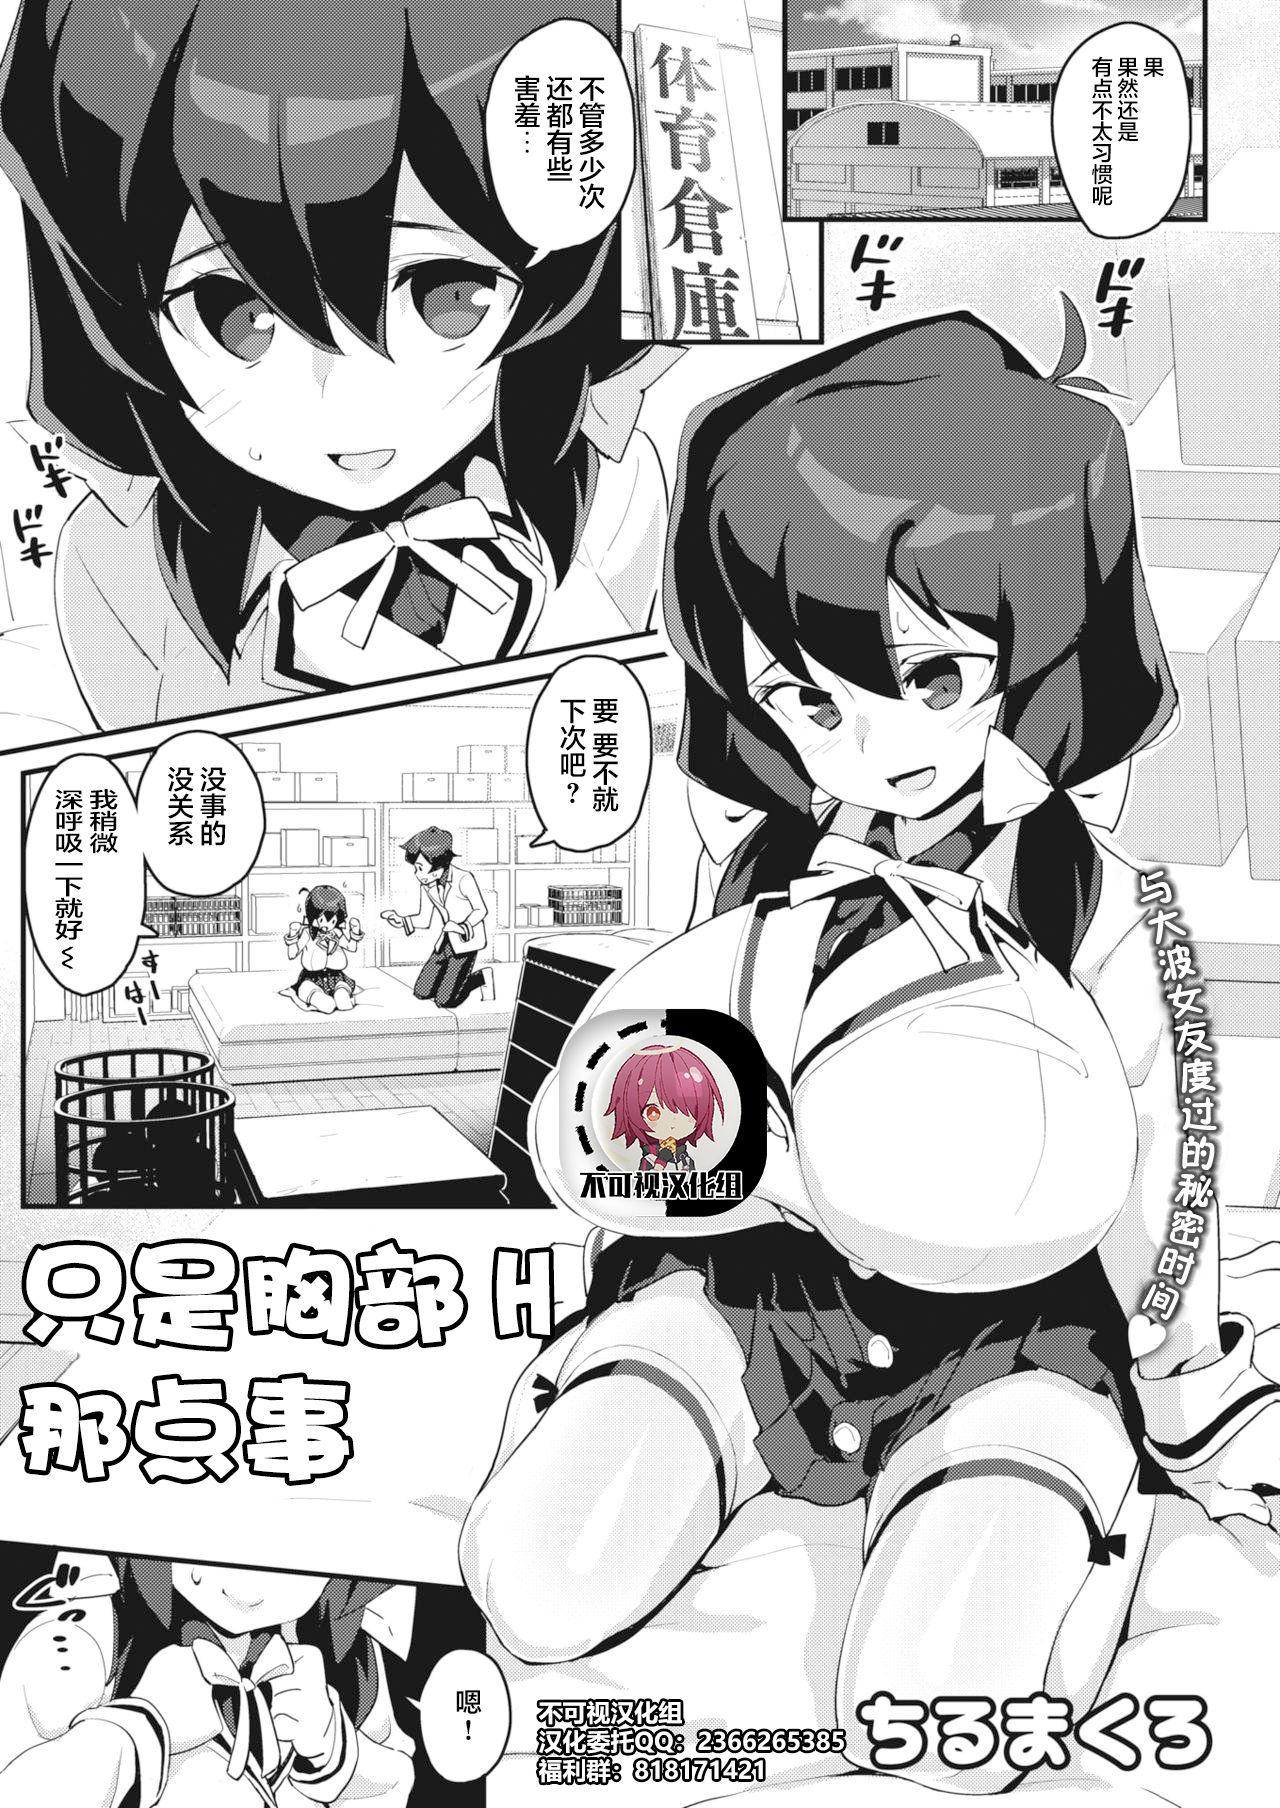 Exgf [Chirumakuro] Oppai H dake no Kankei | A Relationship with Lewd Boobs Only! (COMIC HOTMILK 2021-04) [Chinese]【不可视汉化】 Tranny Sex - Picture 1